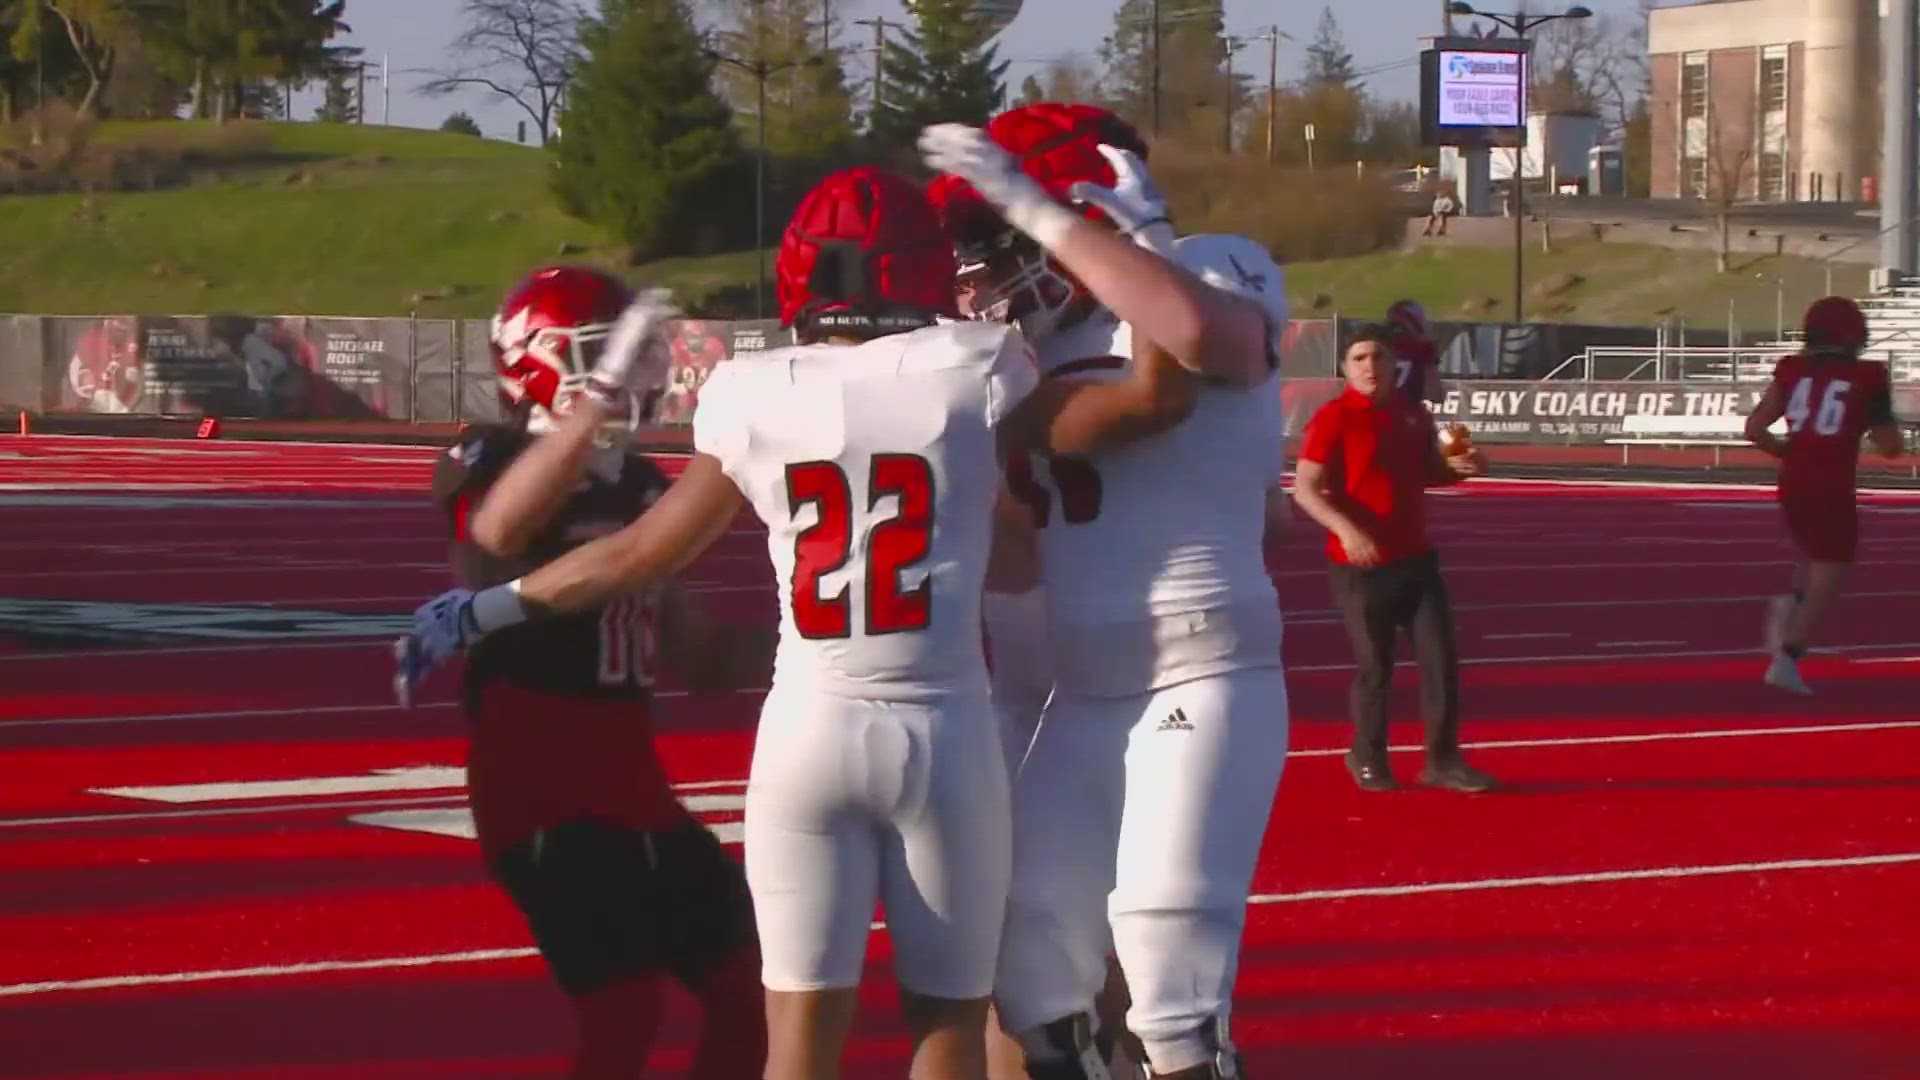 Eastern Washington's defense got the win in the Red and White game 45-41.